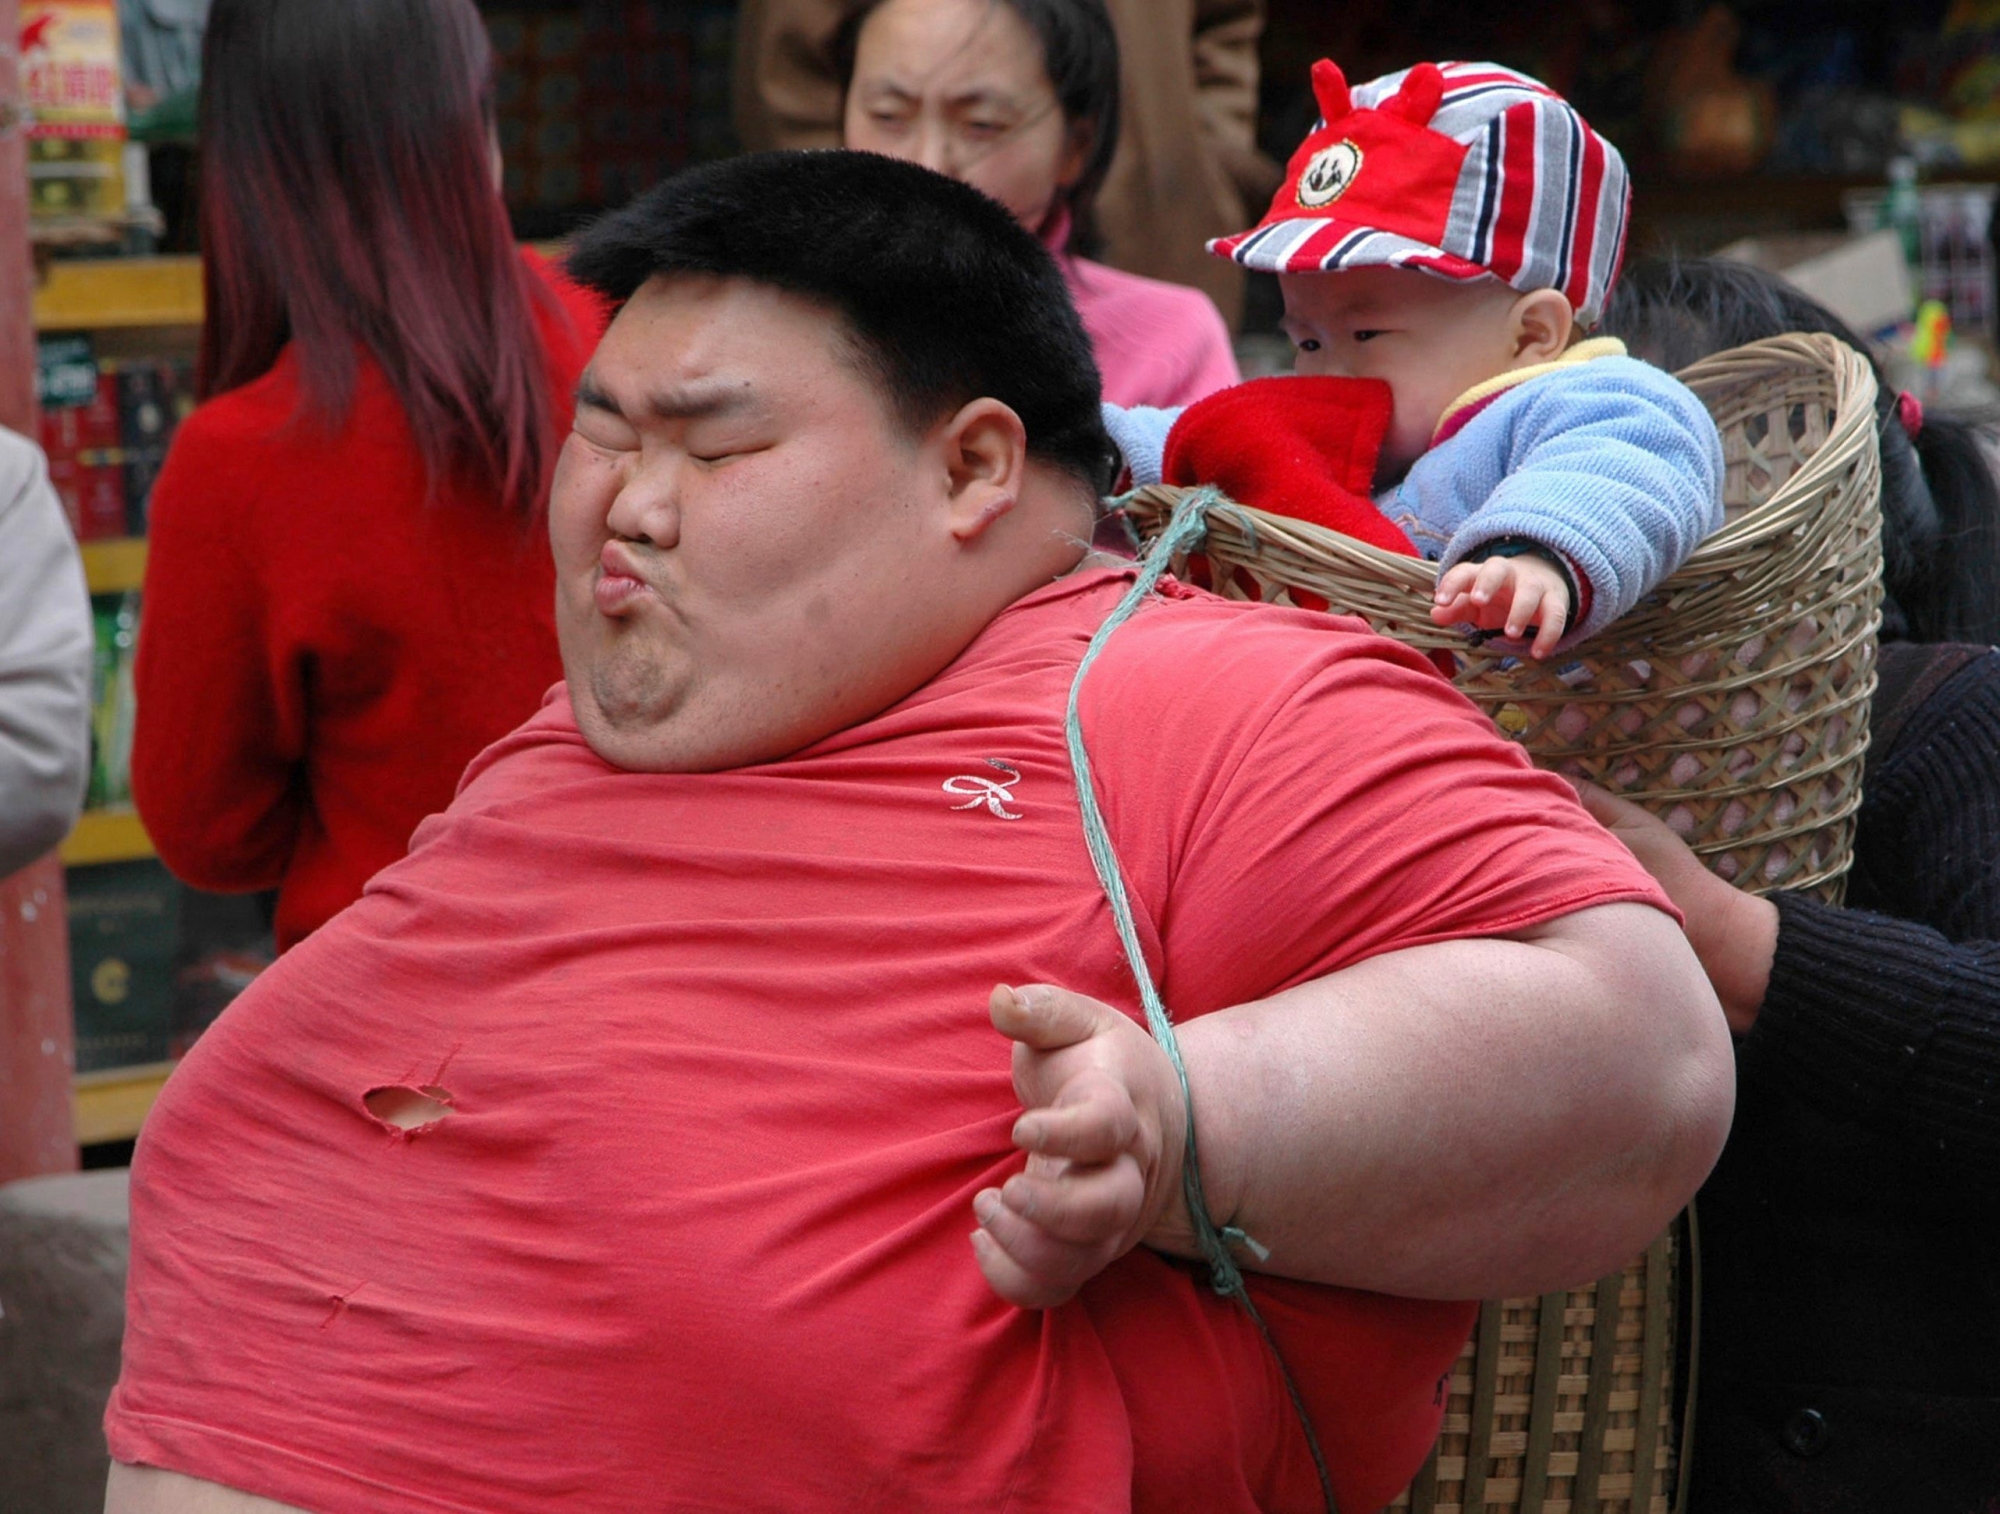 Twenty-six year-old Liang Yong carries his child in a basket in China's Chongqing Municipality, Monday April 17, 2006.  Liang, who weighed 220 kg at his heaviest, had slimmed down to 110 kg after receiving treatment for obesity at age 23.  But his weight increased to 210kg after marrying his wife Tang Xiaoyan, who gave birth to a child. China's Health Ministry says that 200 million Chinese are overweight, while the number of people considered clinically obese has nearly doubled to 60 million, or 7.1 percent of adults, since 1992.  (KEYSTONE/AP Photo/EyePress) ** CHINA OUT ** CHINA OBESITY